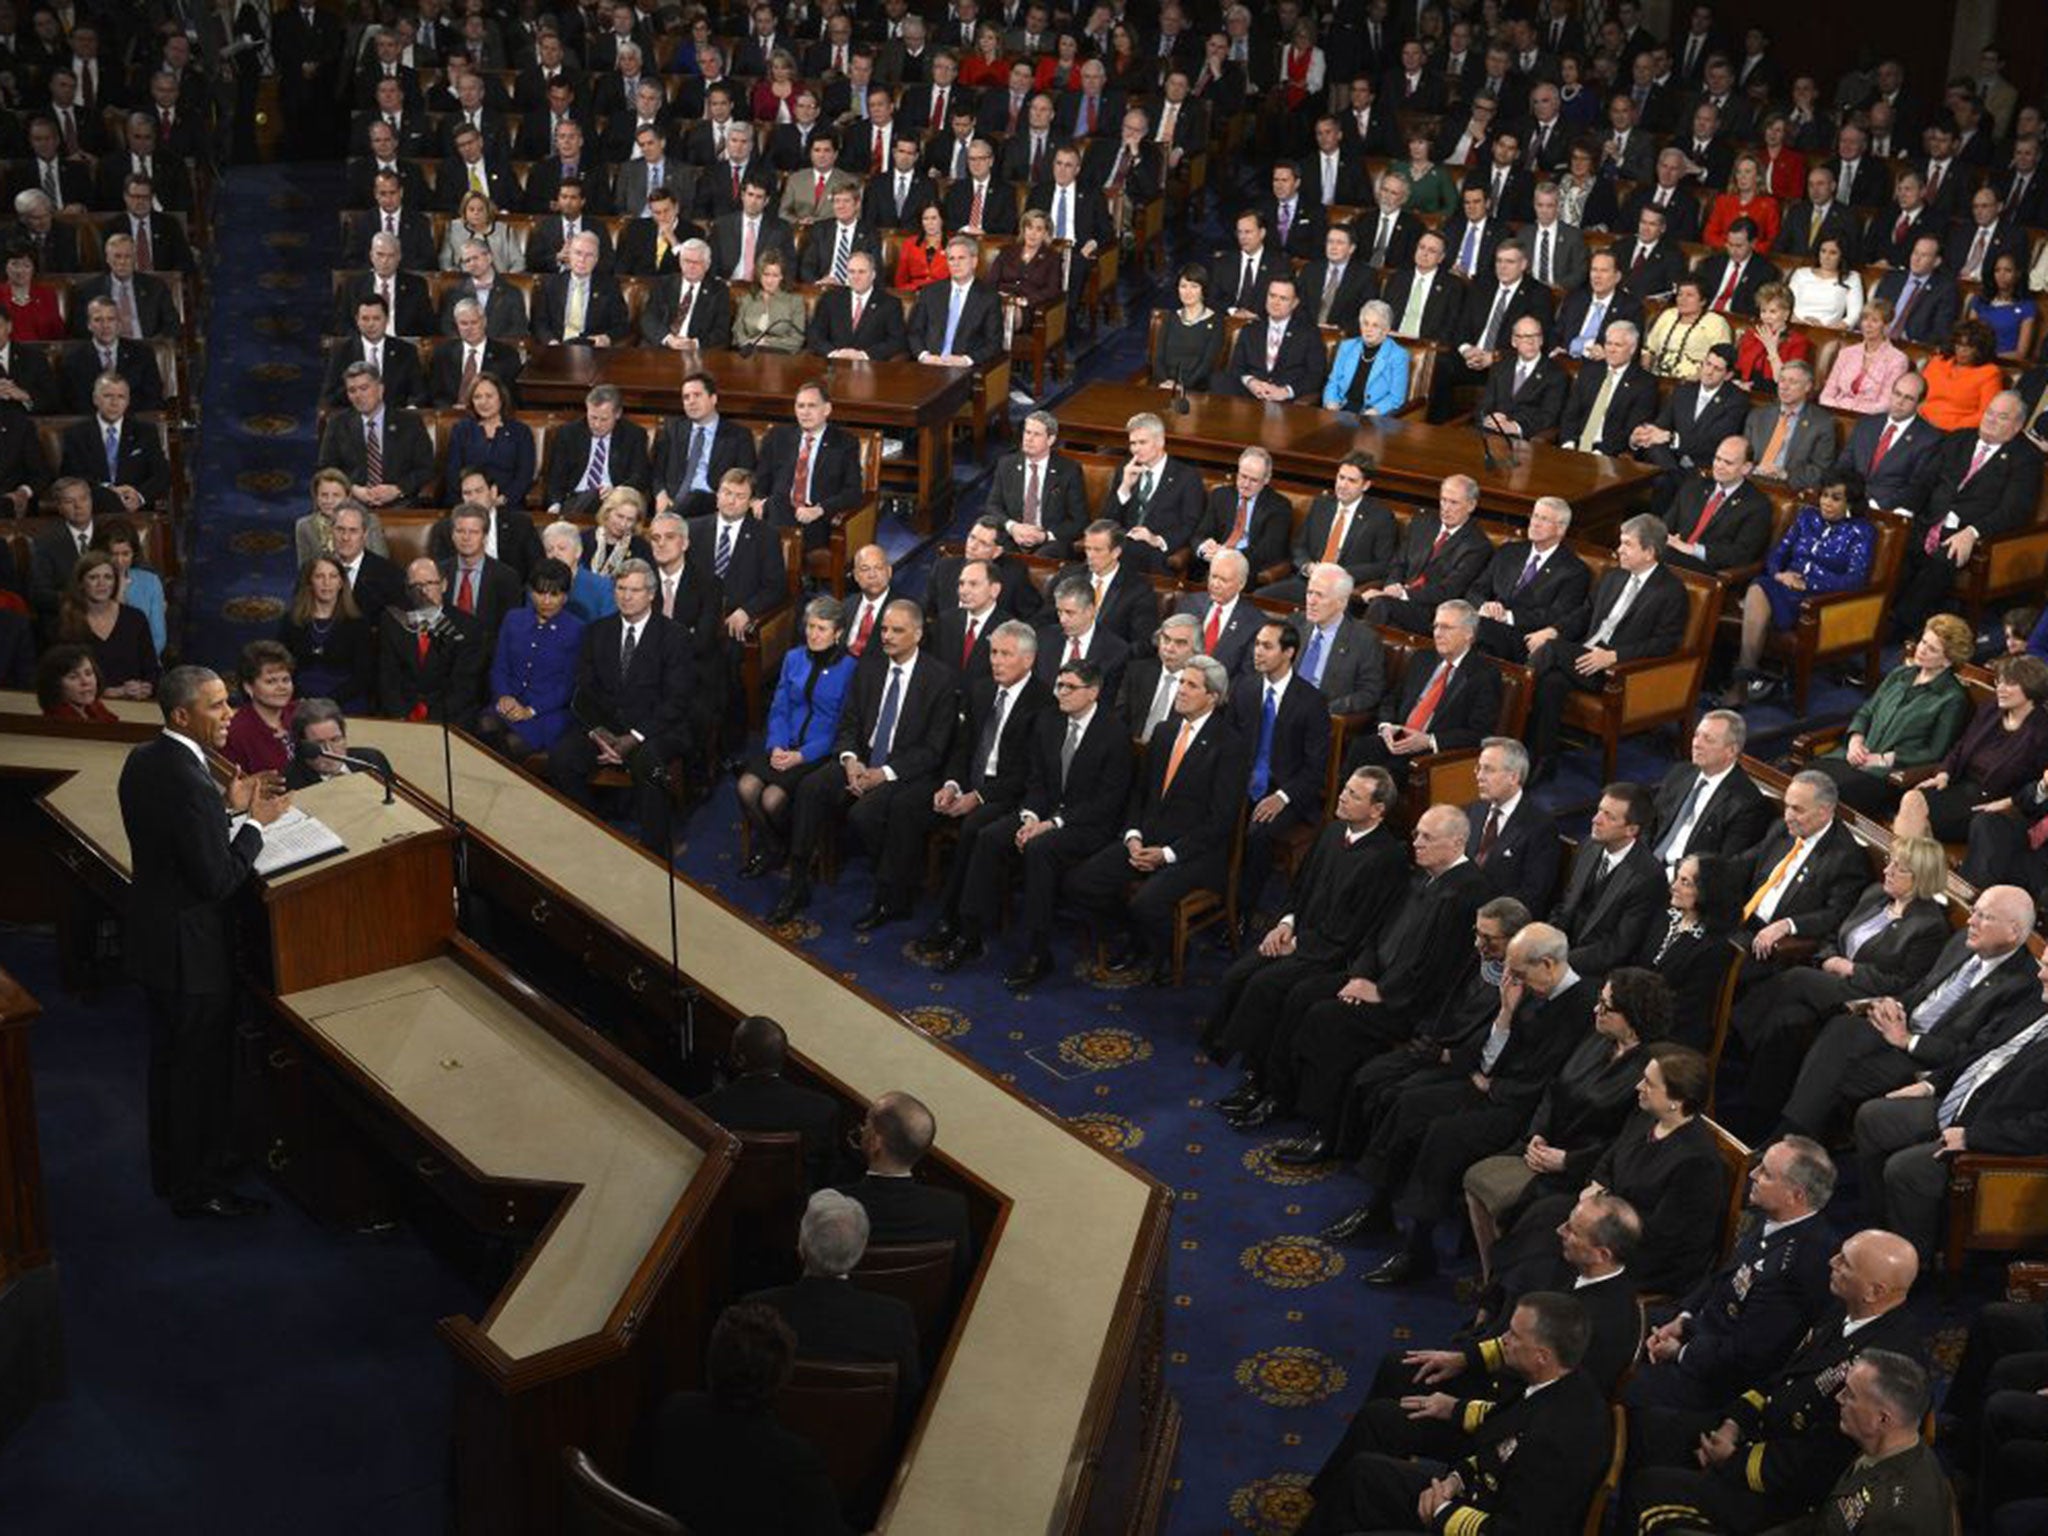 Barack Obama delivers last year’s State of the Union address